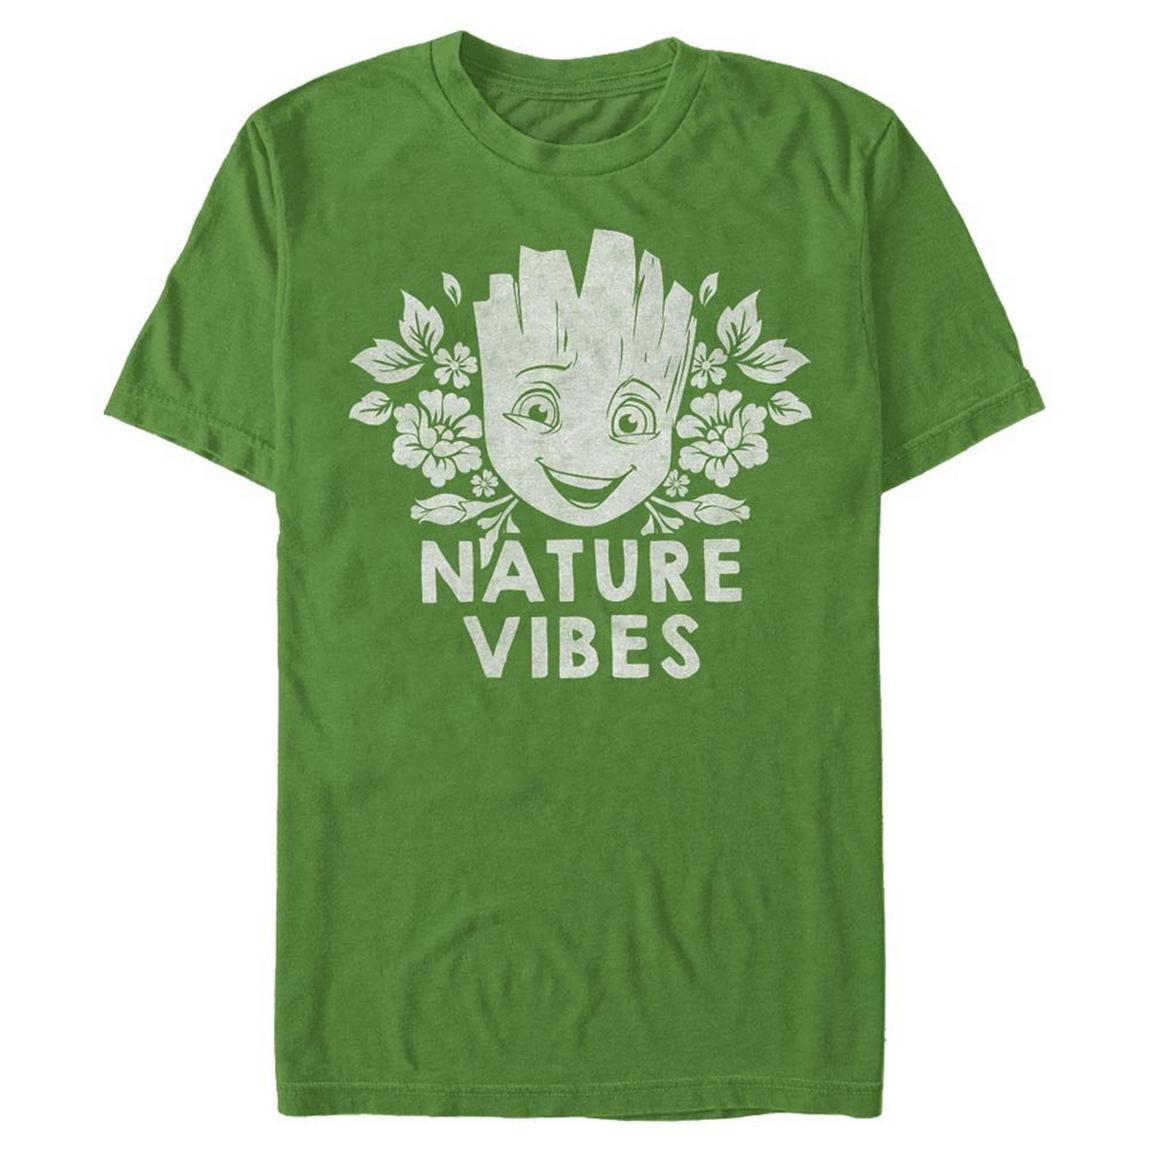 Marvel Guardians of the Galaxy Groot Nature Vibes Unisex T-Shirt, Size: Small, Fifth Sun